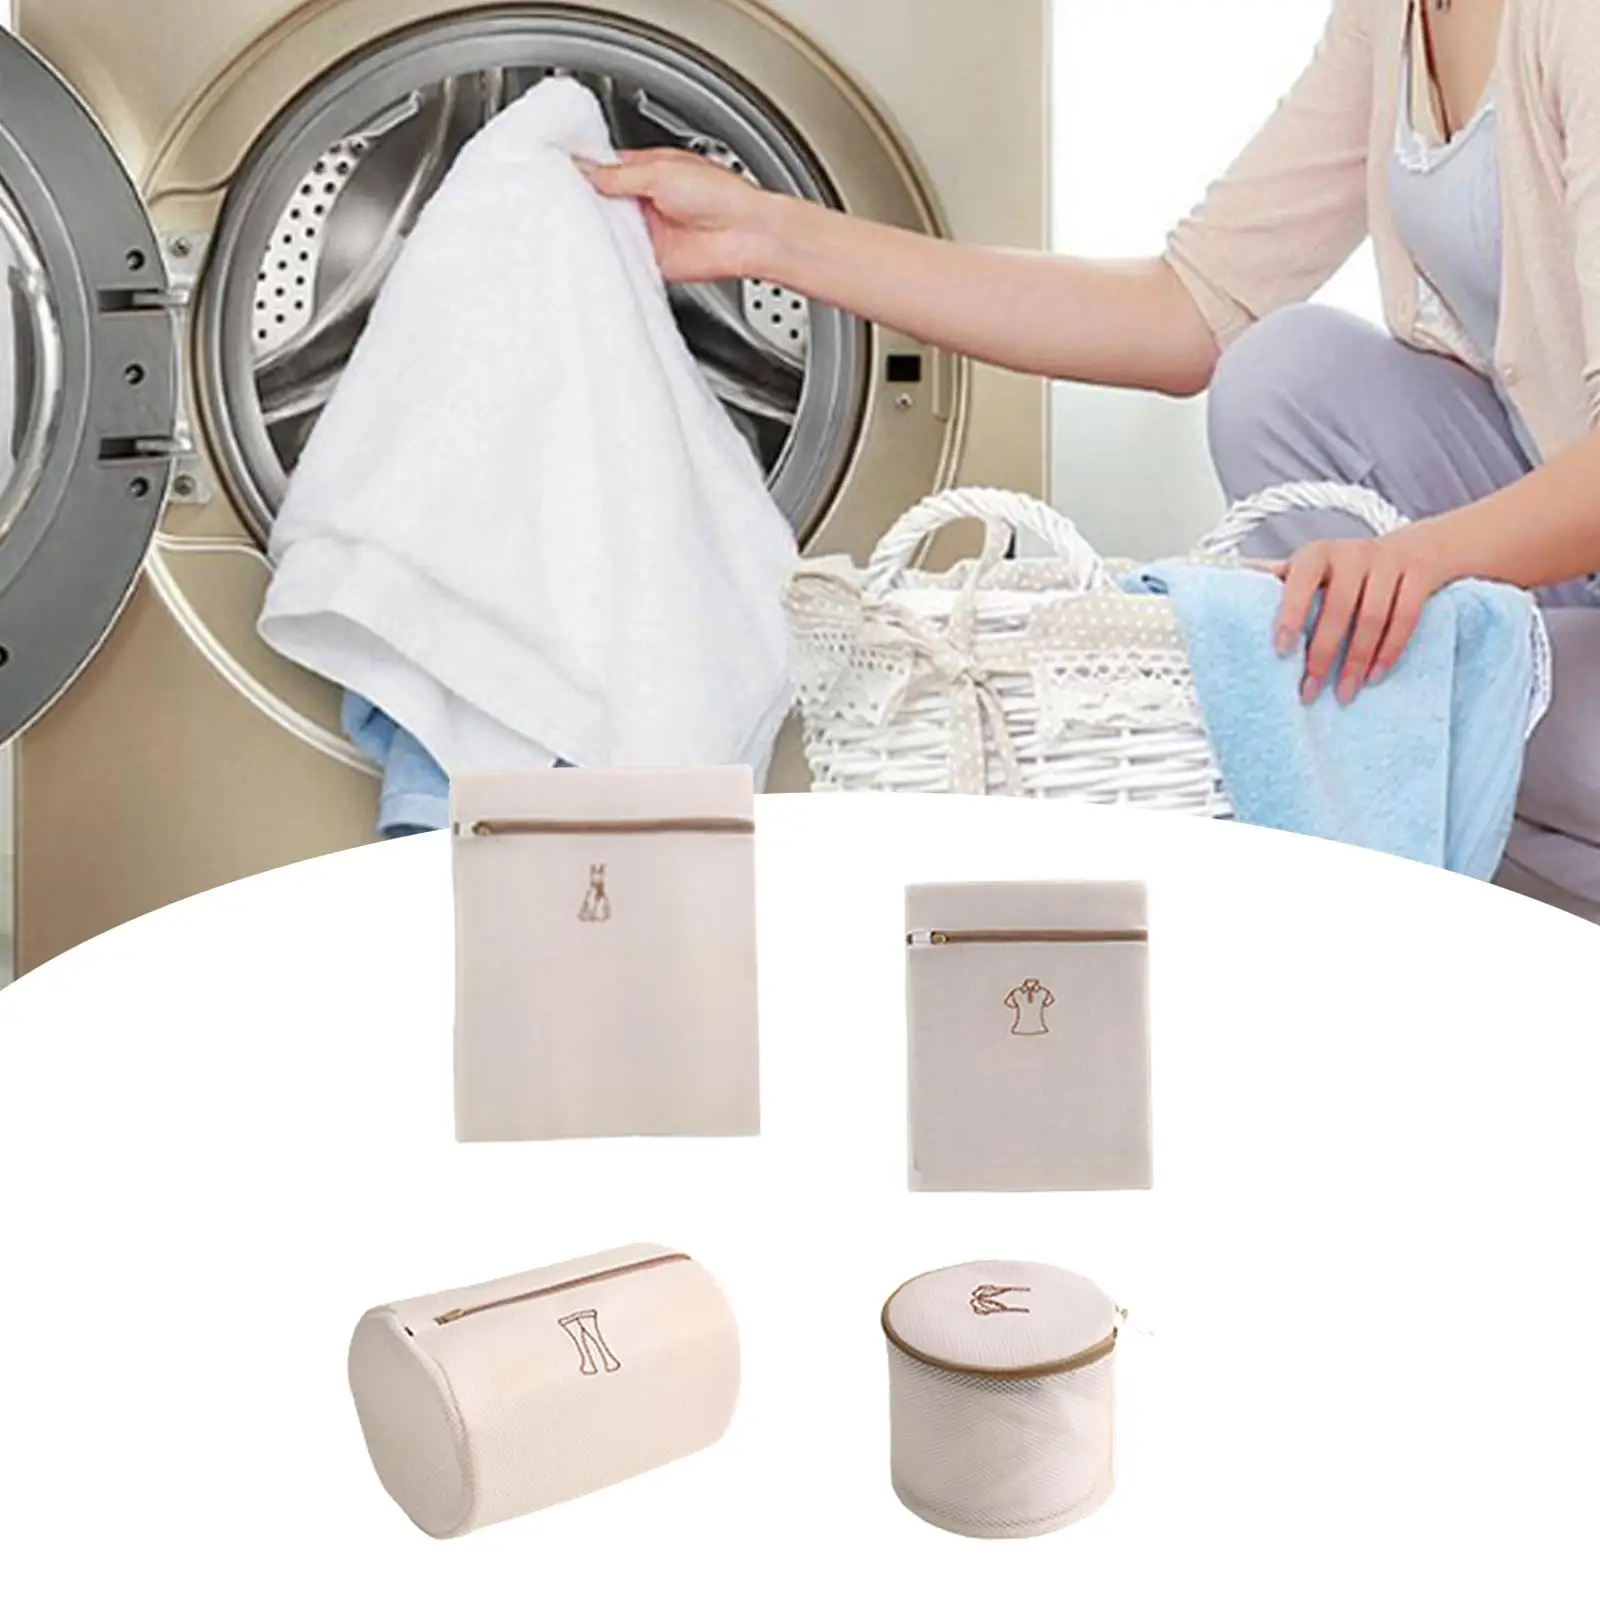 Mesh Laundry Bags with Premium Zipper Travel Laundry Storage Durable Washing Machine Mesh Bags for Pants Bra Dress Tops Trousers